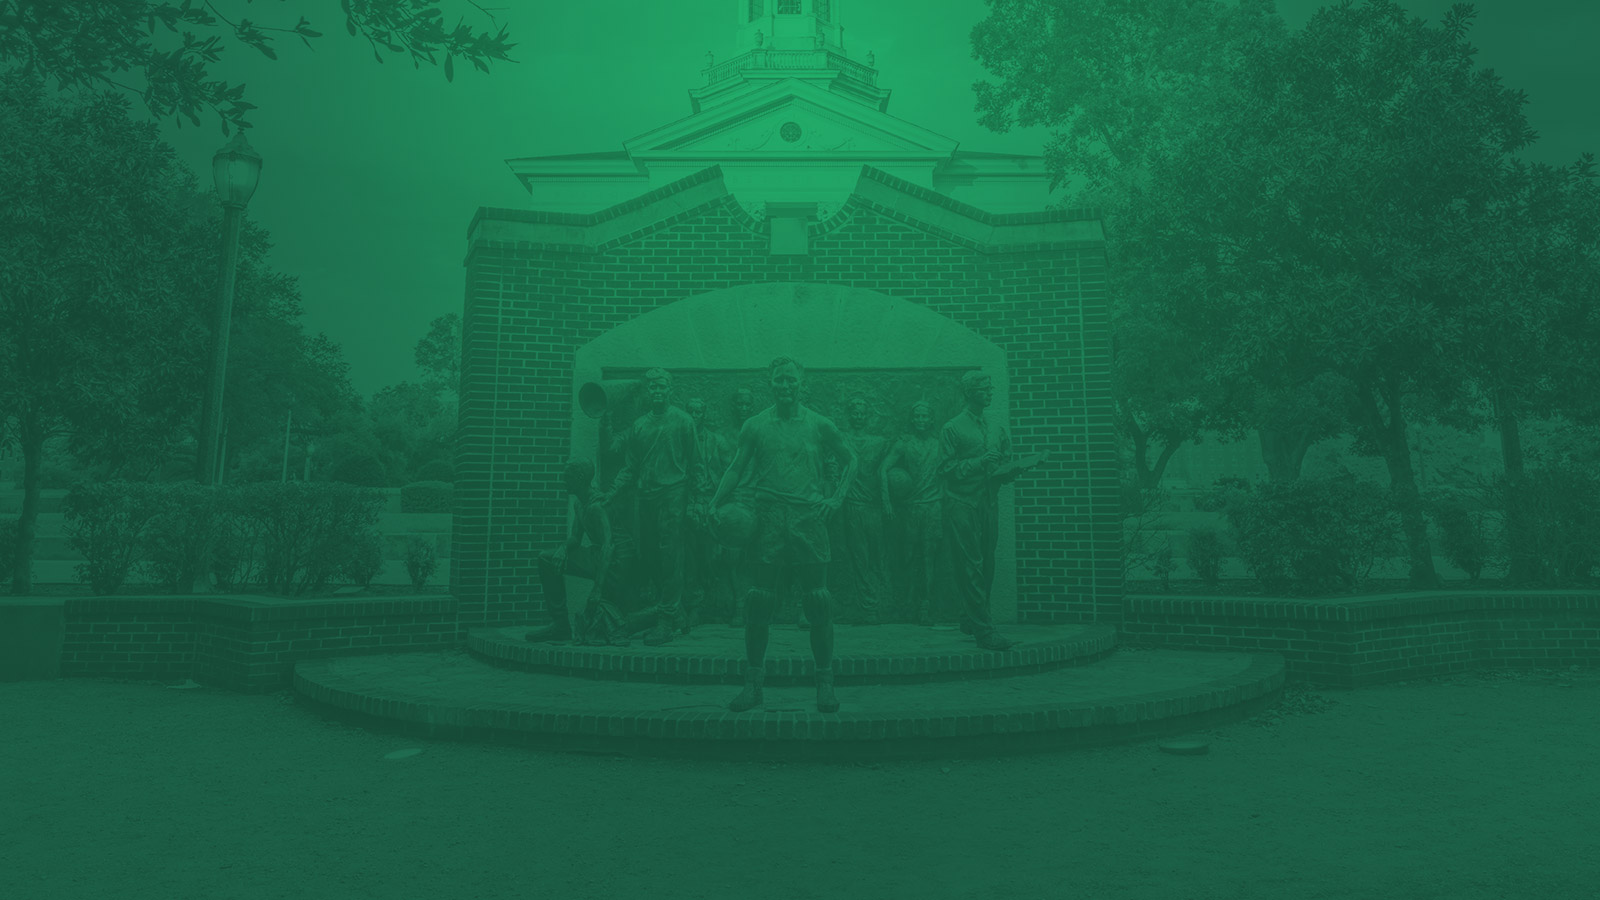 The Immortal Ten statue in front of Pat Neff Hall on the campus of Baylor University